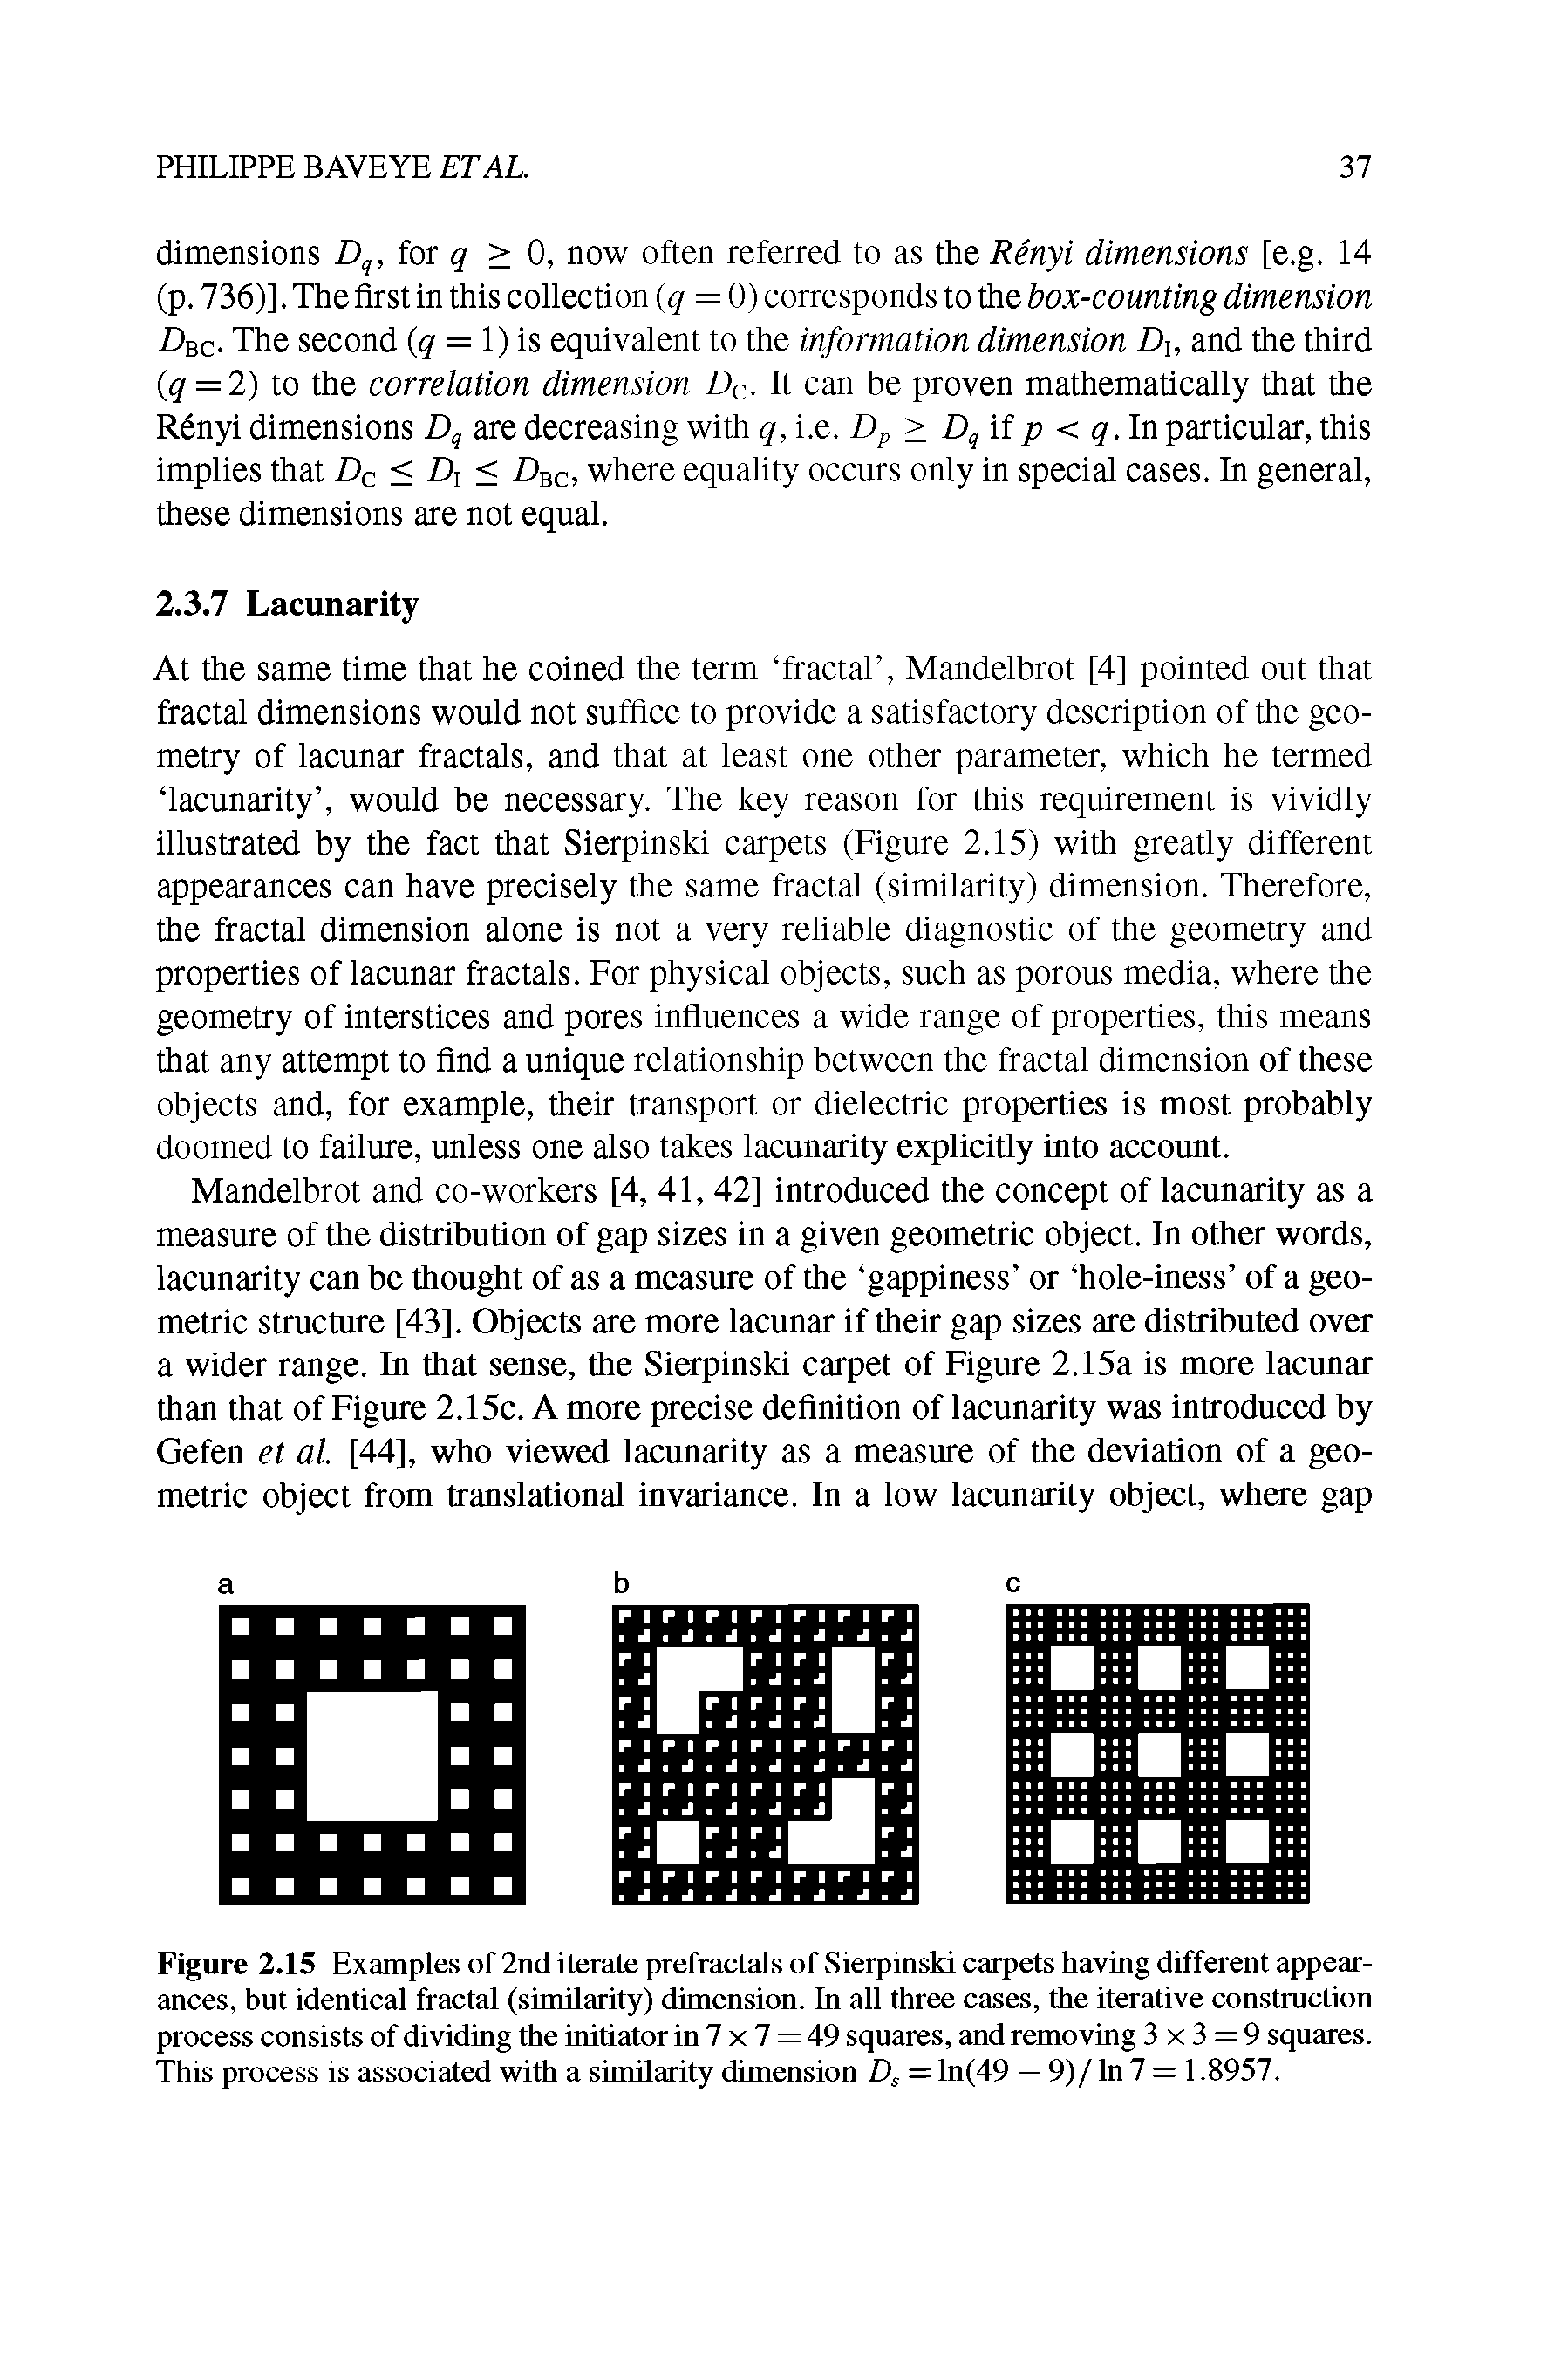 Figure 2.15 Examples of 2nd iterate prefractals of Sierpinski carpets having different appearances, but identical fractal (similarity) dimension. In all three cases, the iterative construction process consists of dividing the initiator in 7 x 7 = 49 squares, and removing 3x3 = 9 squares. This process is associated with a similarity dimension = ln(49 — 9)/ In 7 = 1.8957.